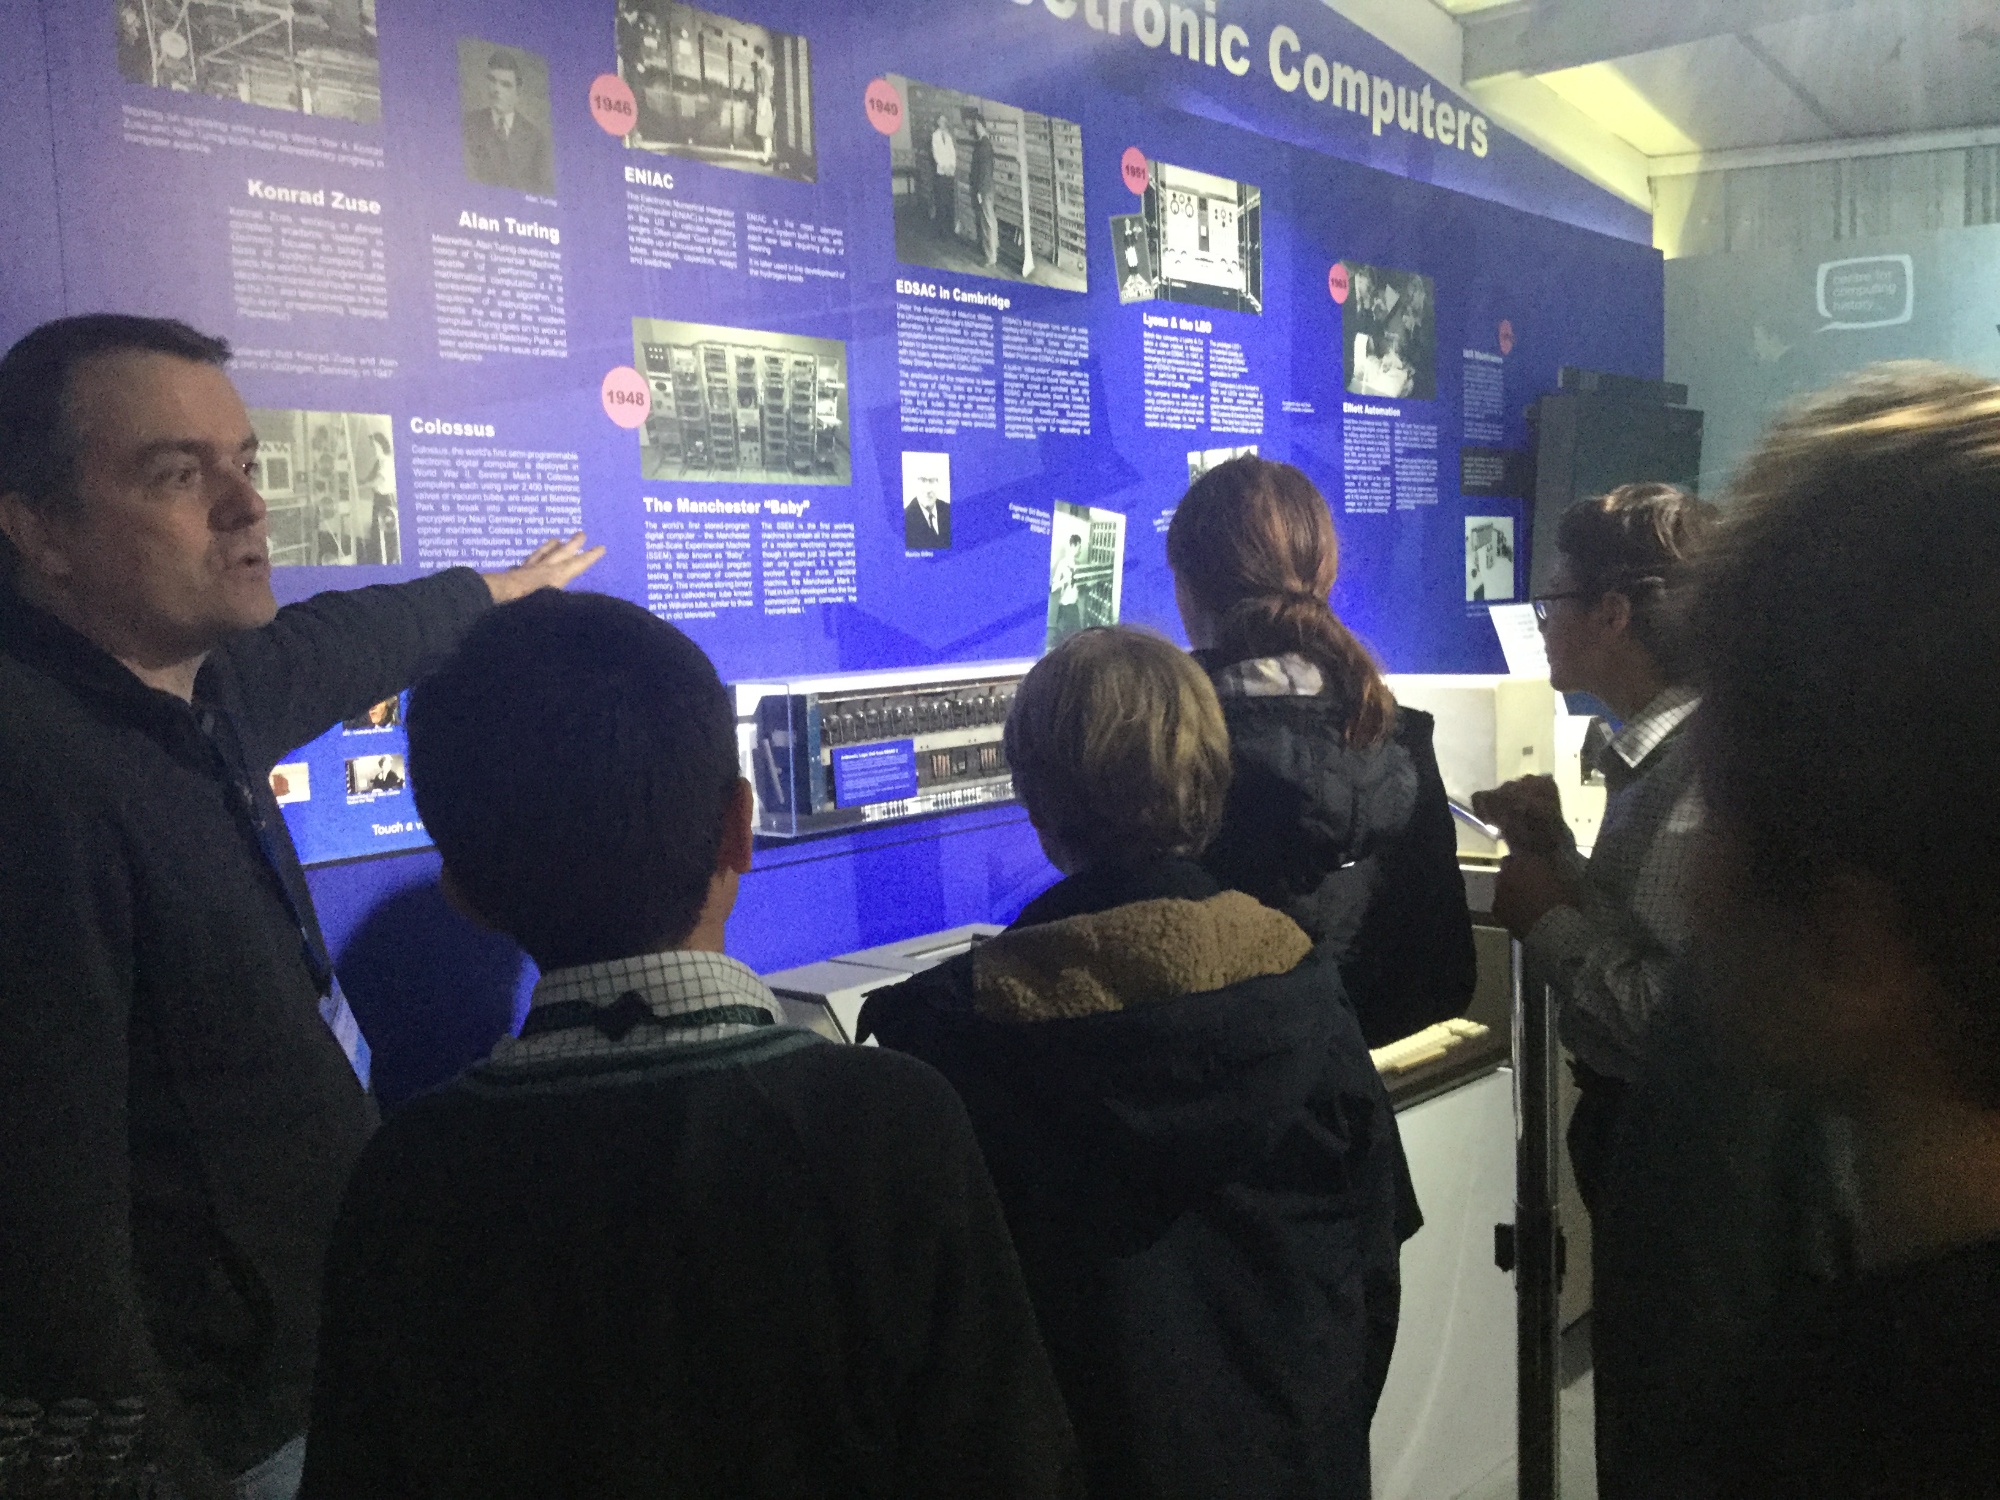 Tour guide explaining the history of computing